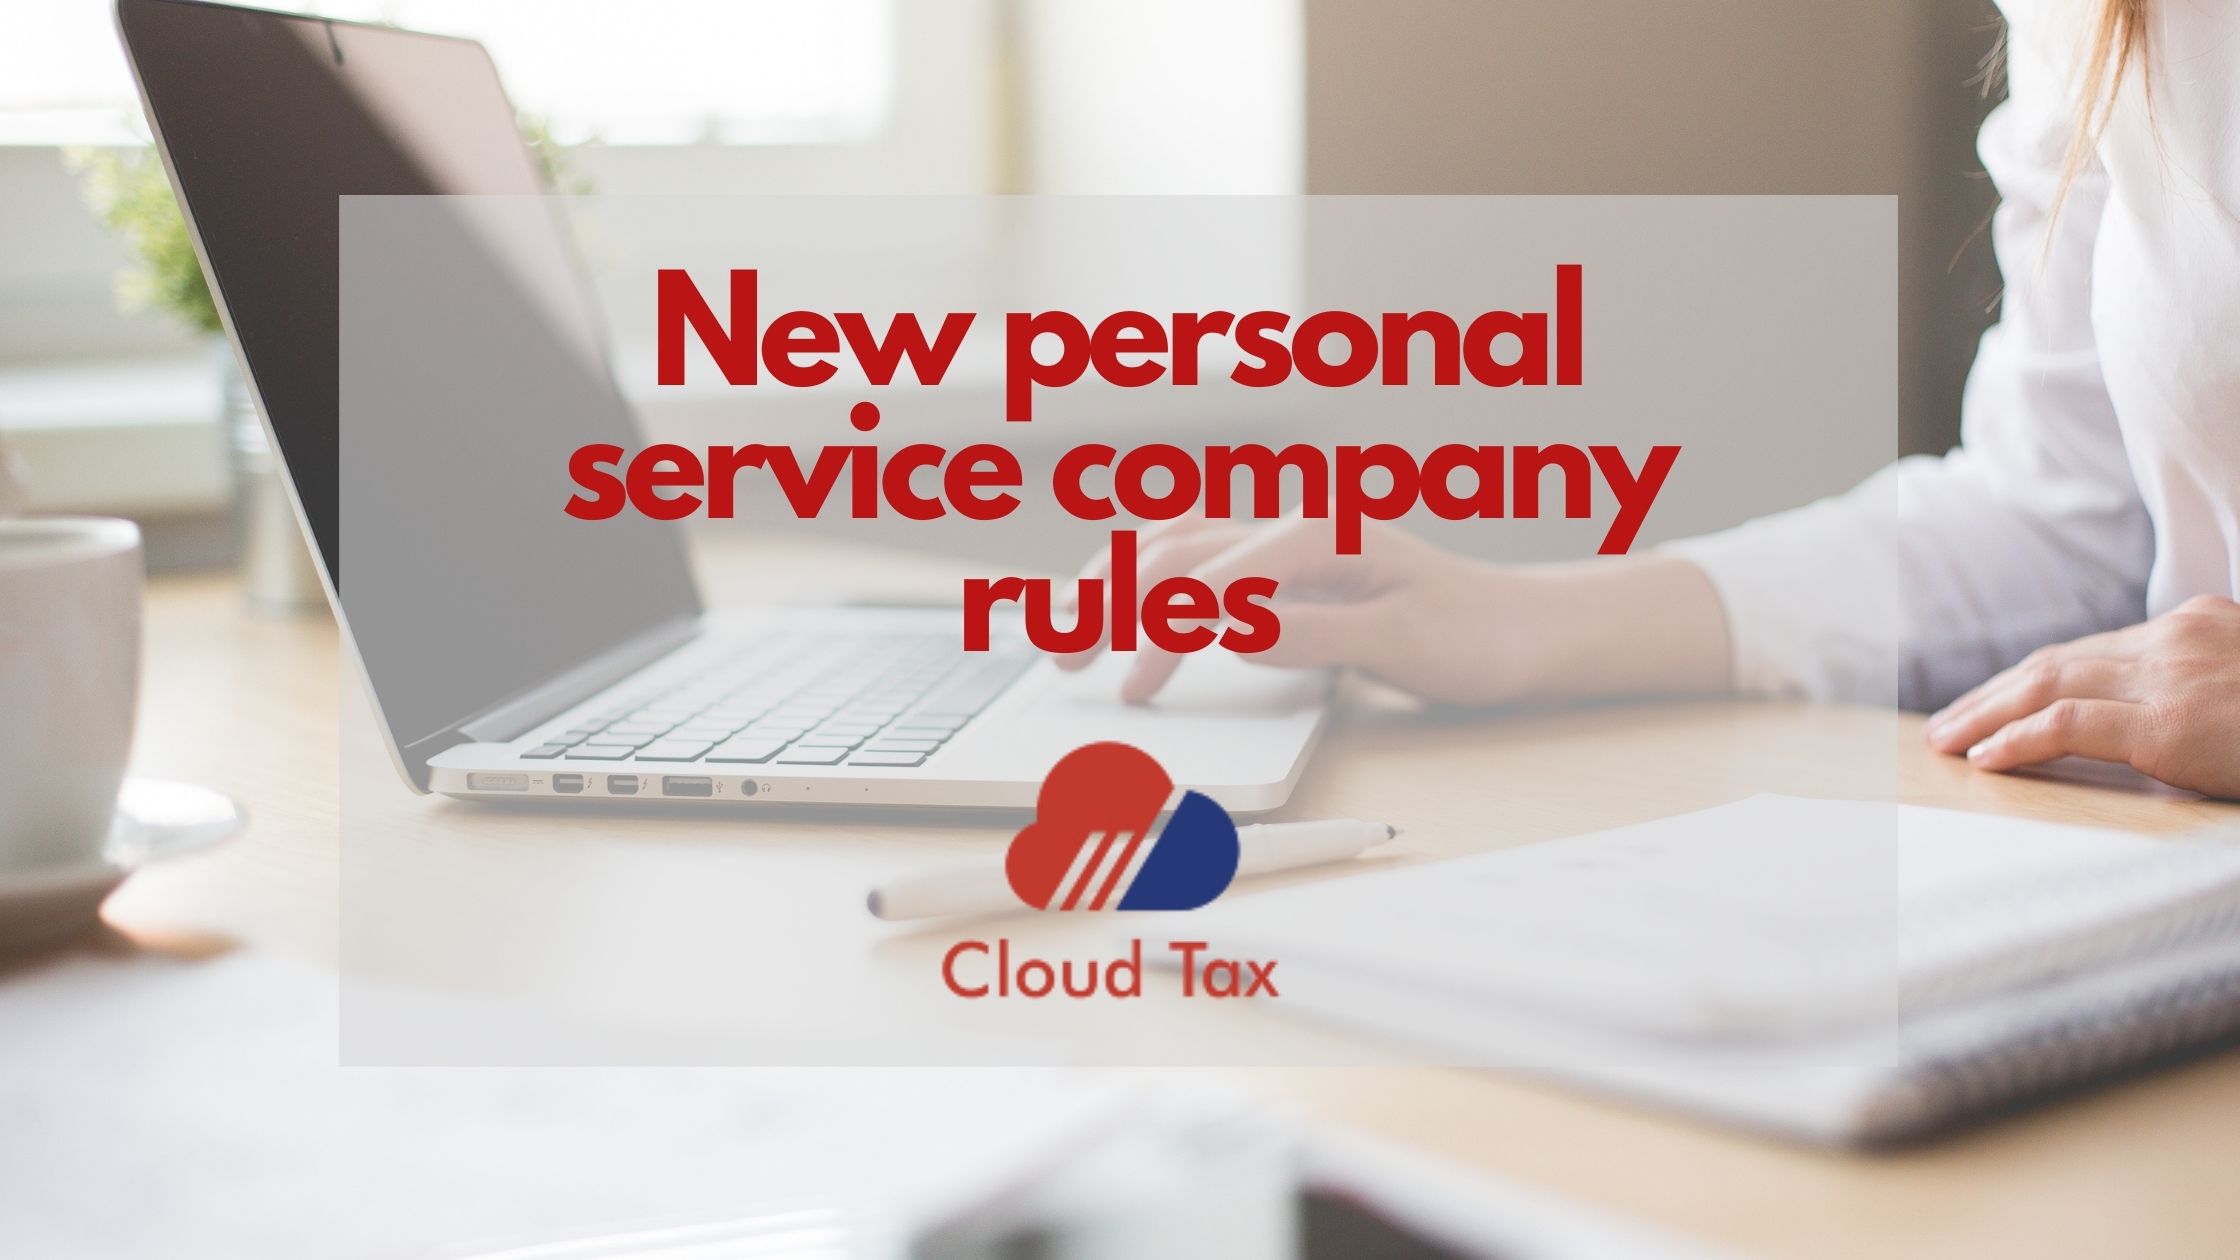 New personal service company rules